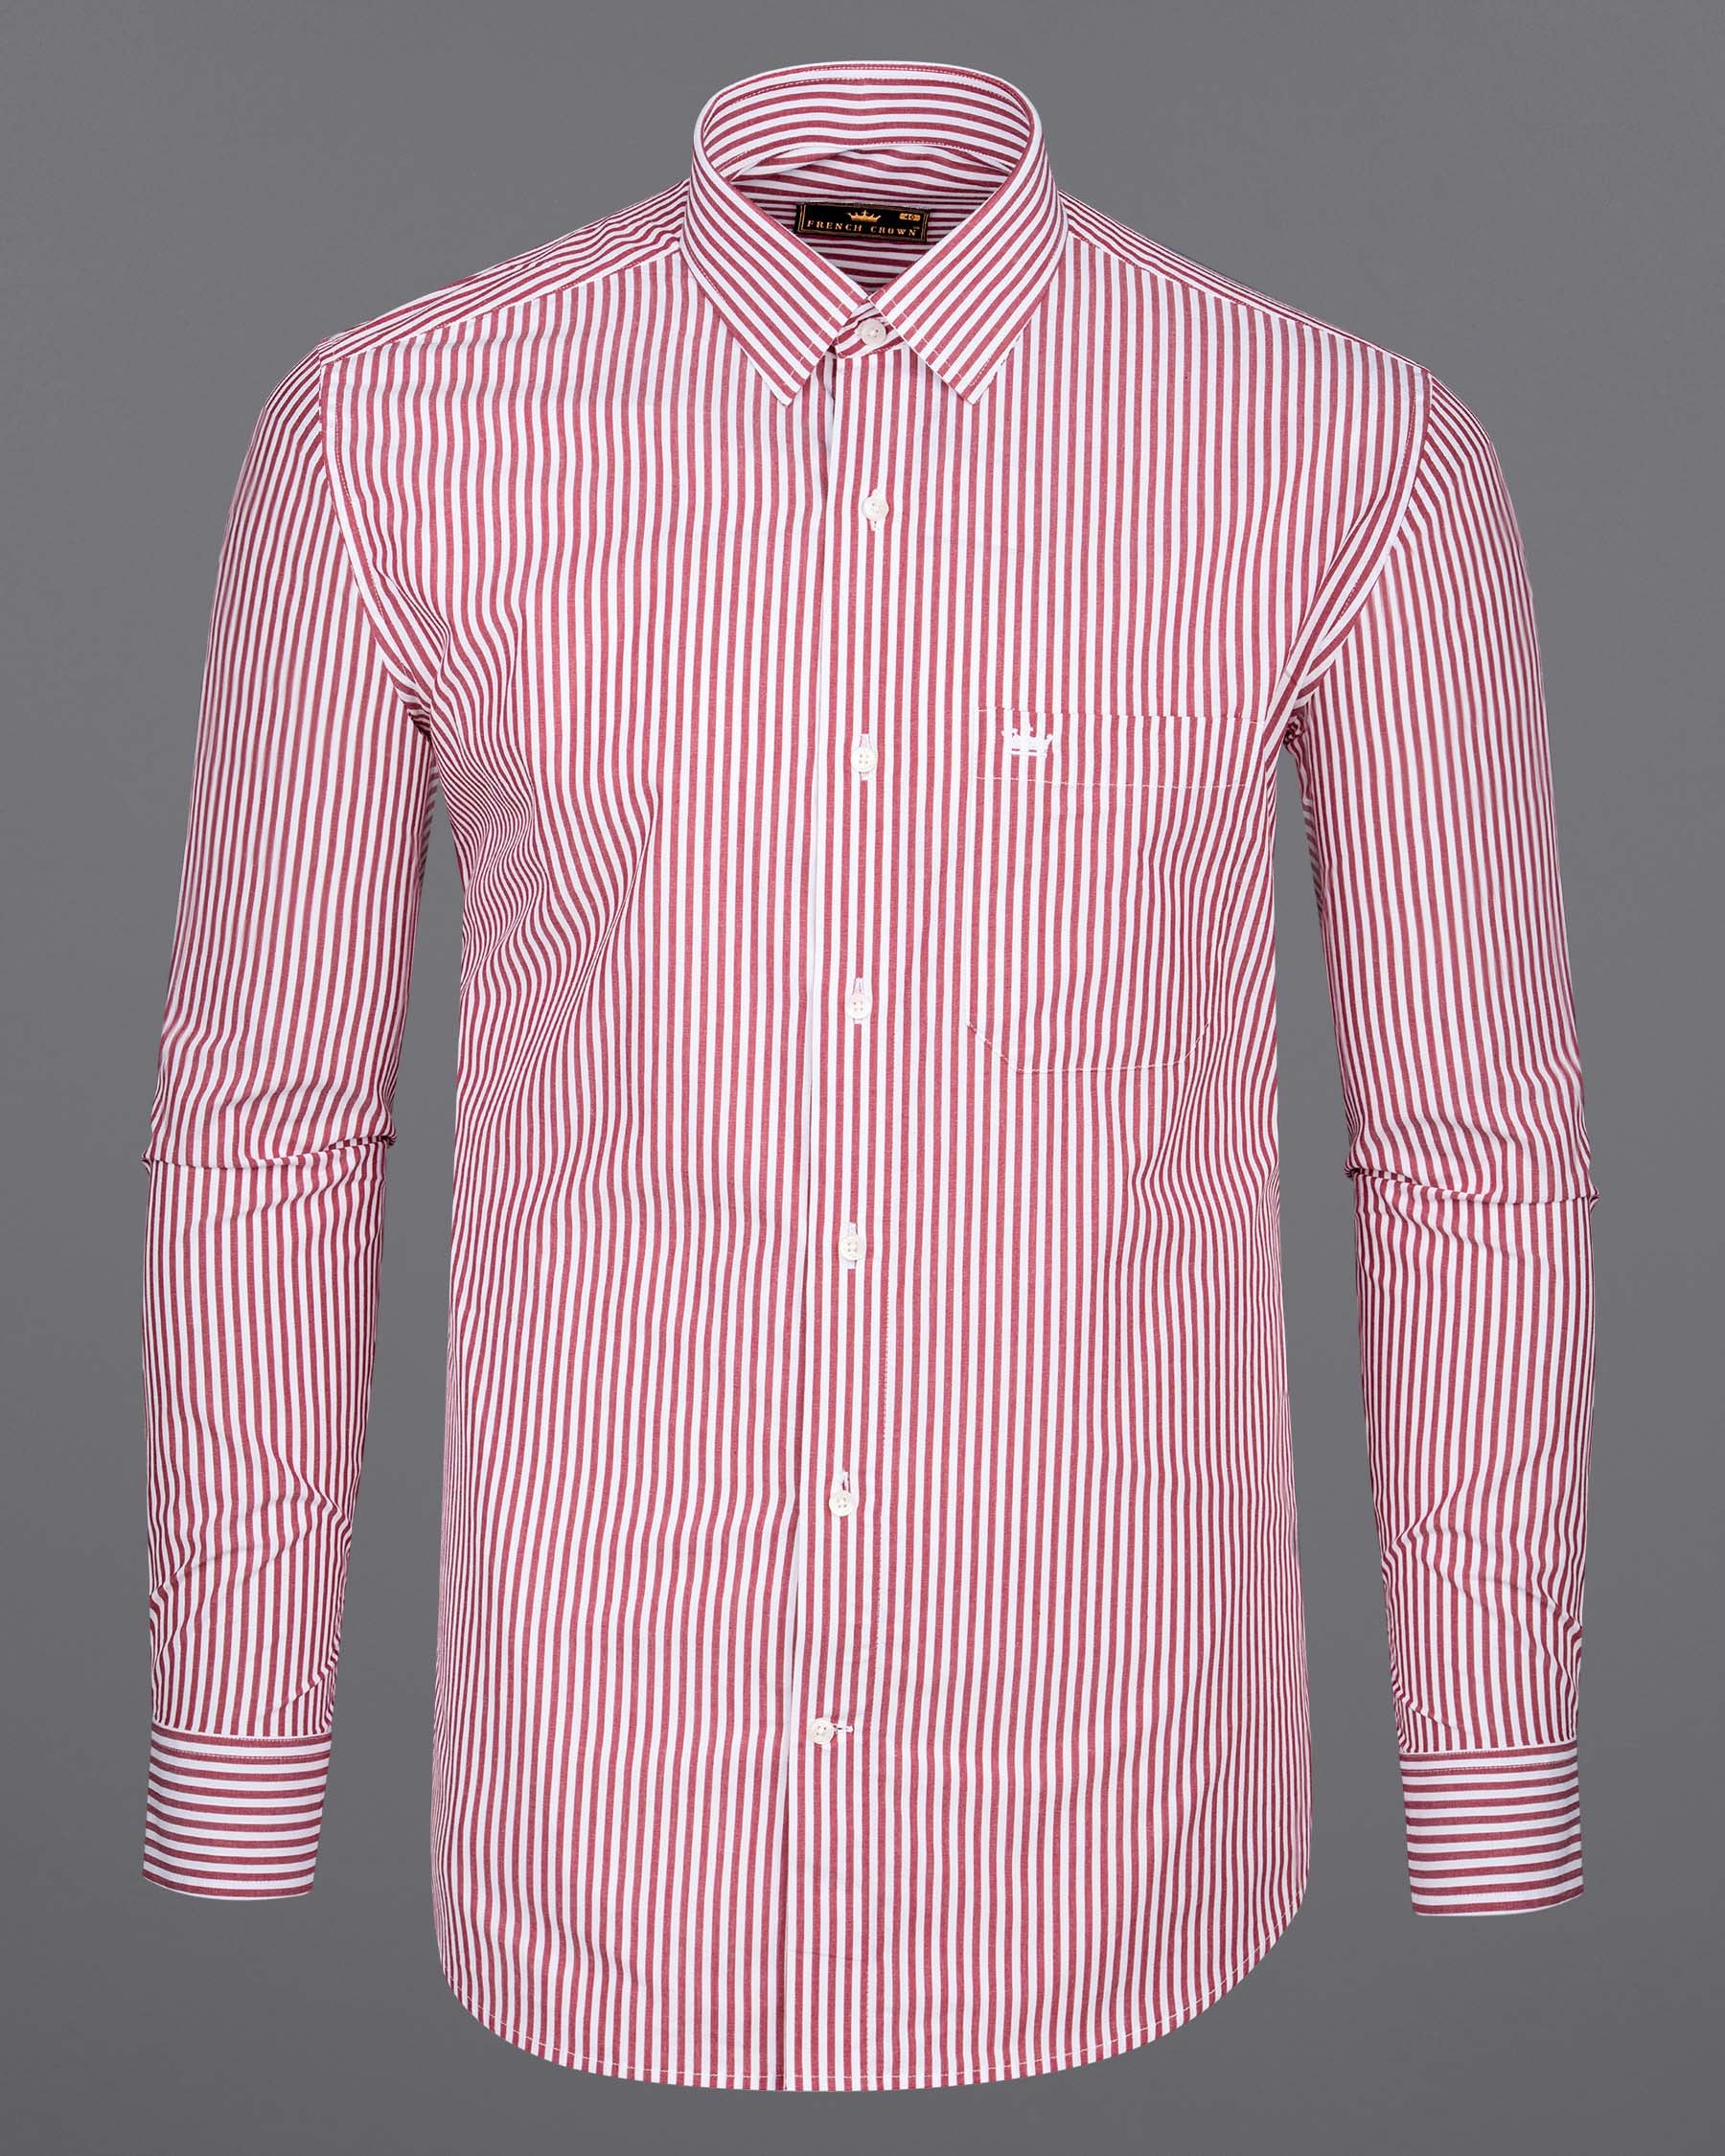 Red and White Striped Premium Cotton Shirt 6686-38,6686-38,6686-39,6686-39,6686-40,6686-40,6686-42,6686-42,6686-44,6686-44,6686-46,6686-46,6686-48,6686-48,6686-50,6686-50,6686-52,6686-52